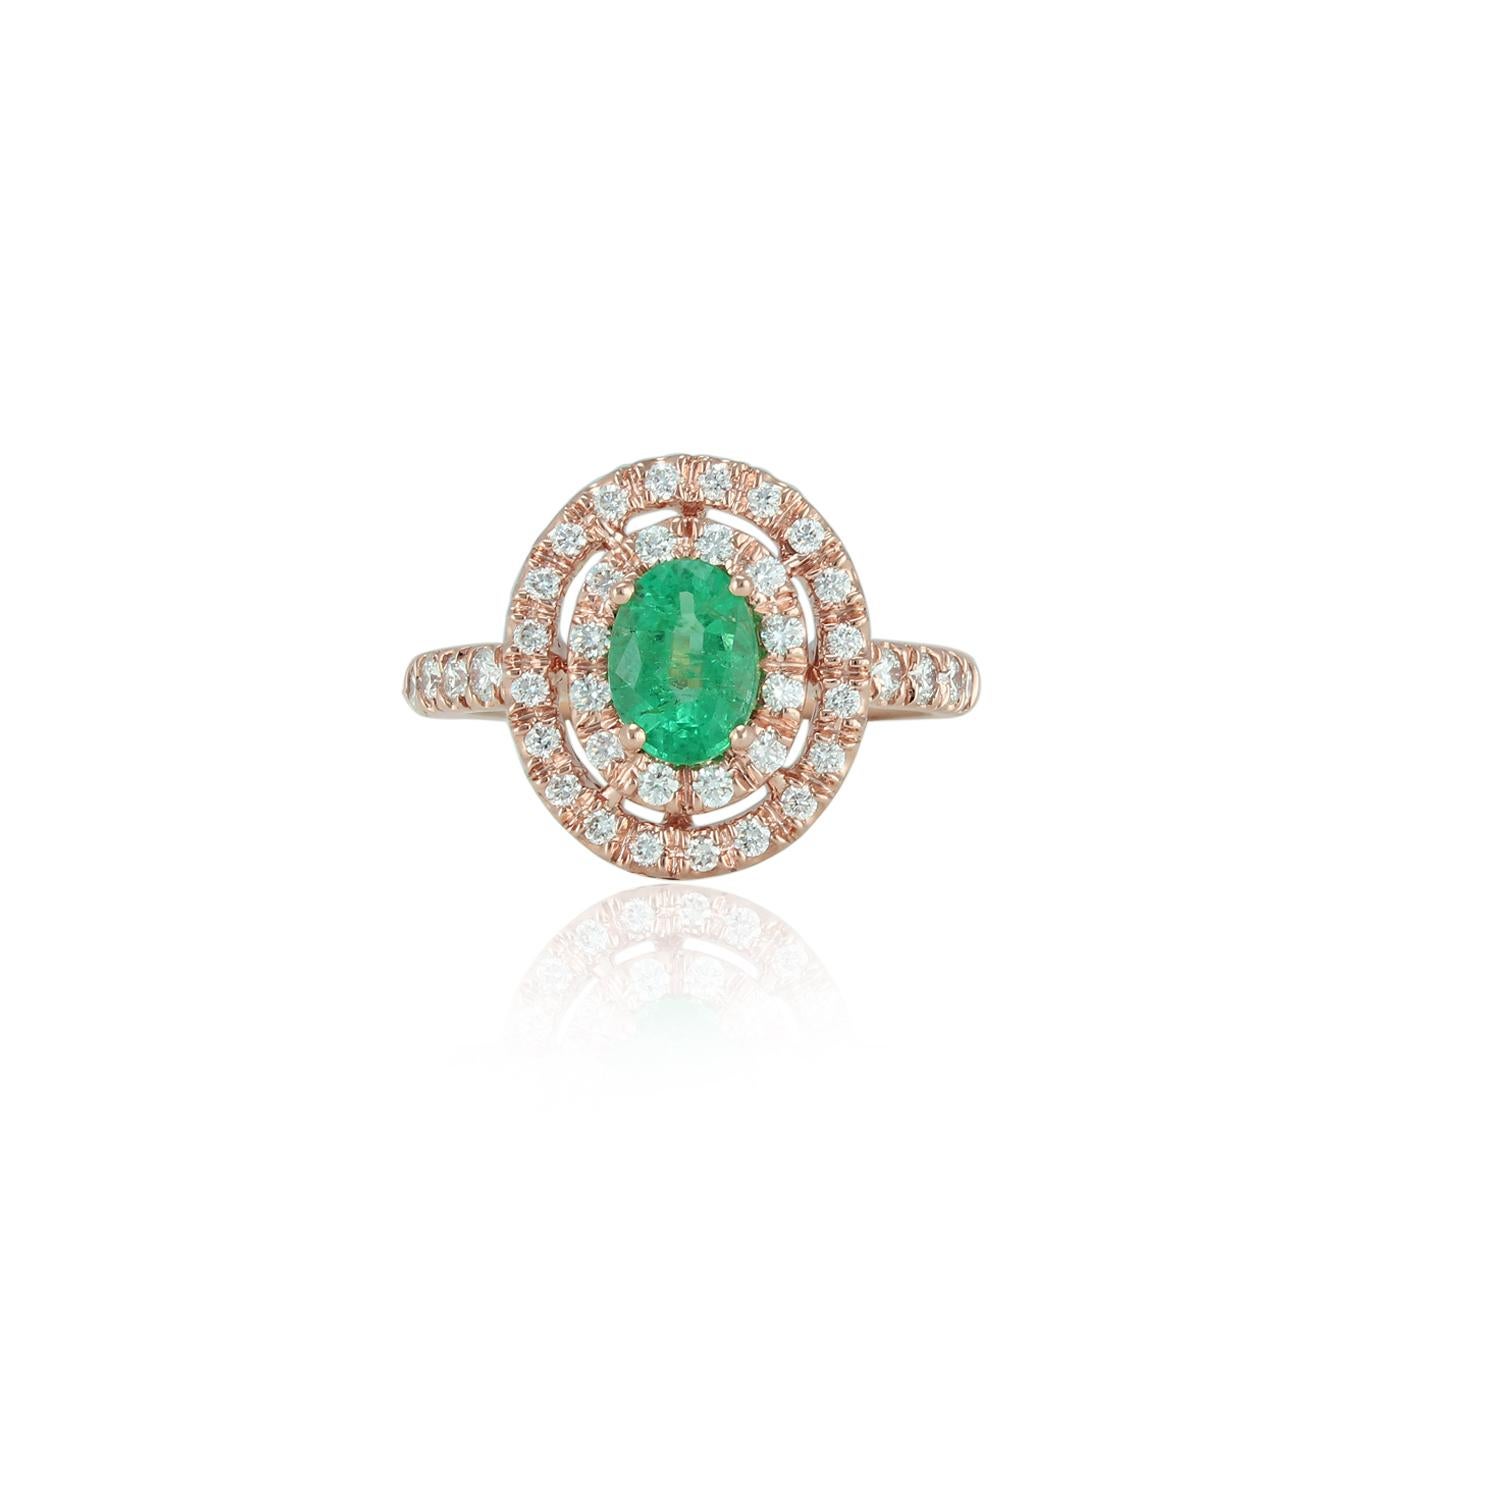 This is an elegant emerald & diamond ring studded in 18k Yellow gold with 1 piece of  Zambian emerald weight 0.88 carat which is surrounded by 42 pieces of diamonds weight 0.61 carat, this entire ring studded in 18k yellow  gold.



 Ring size can